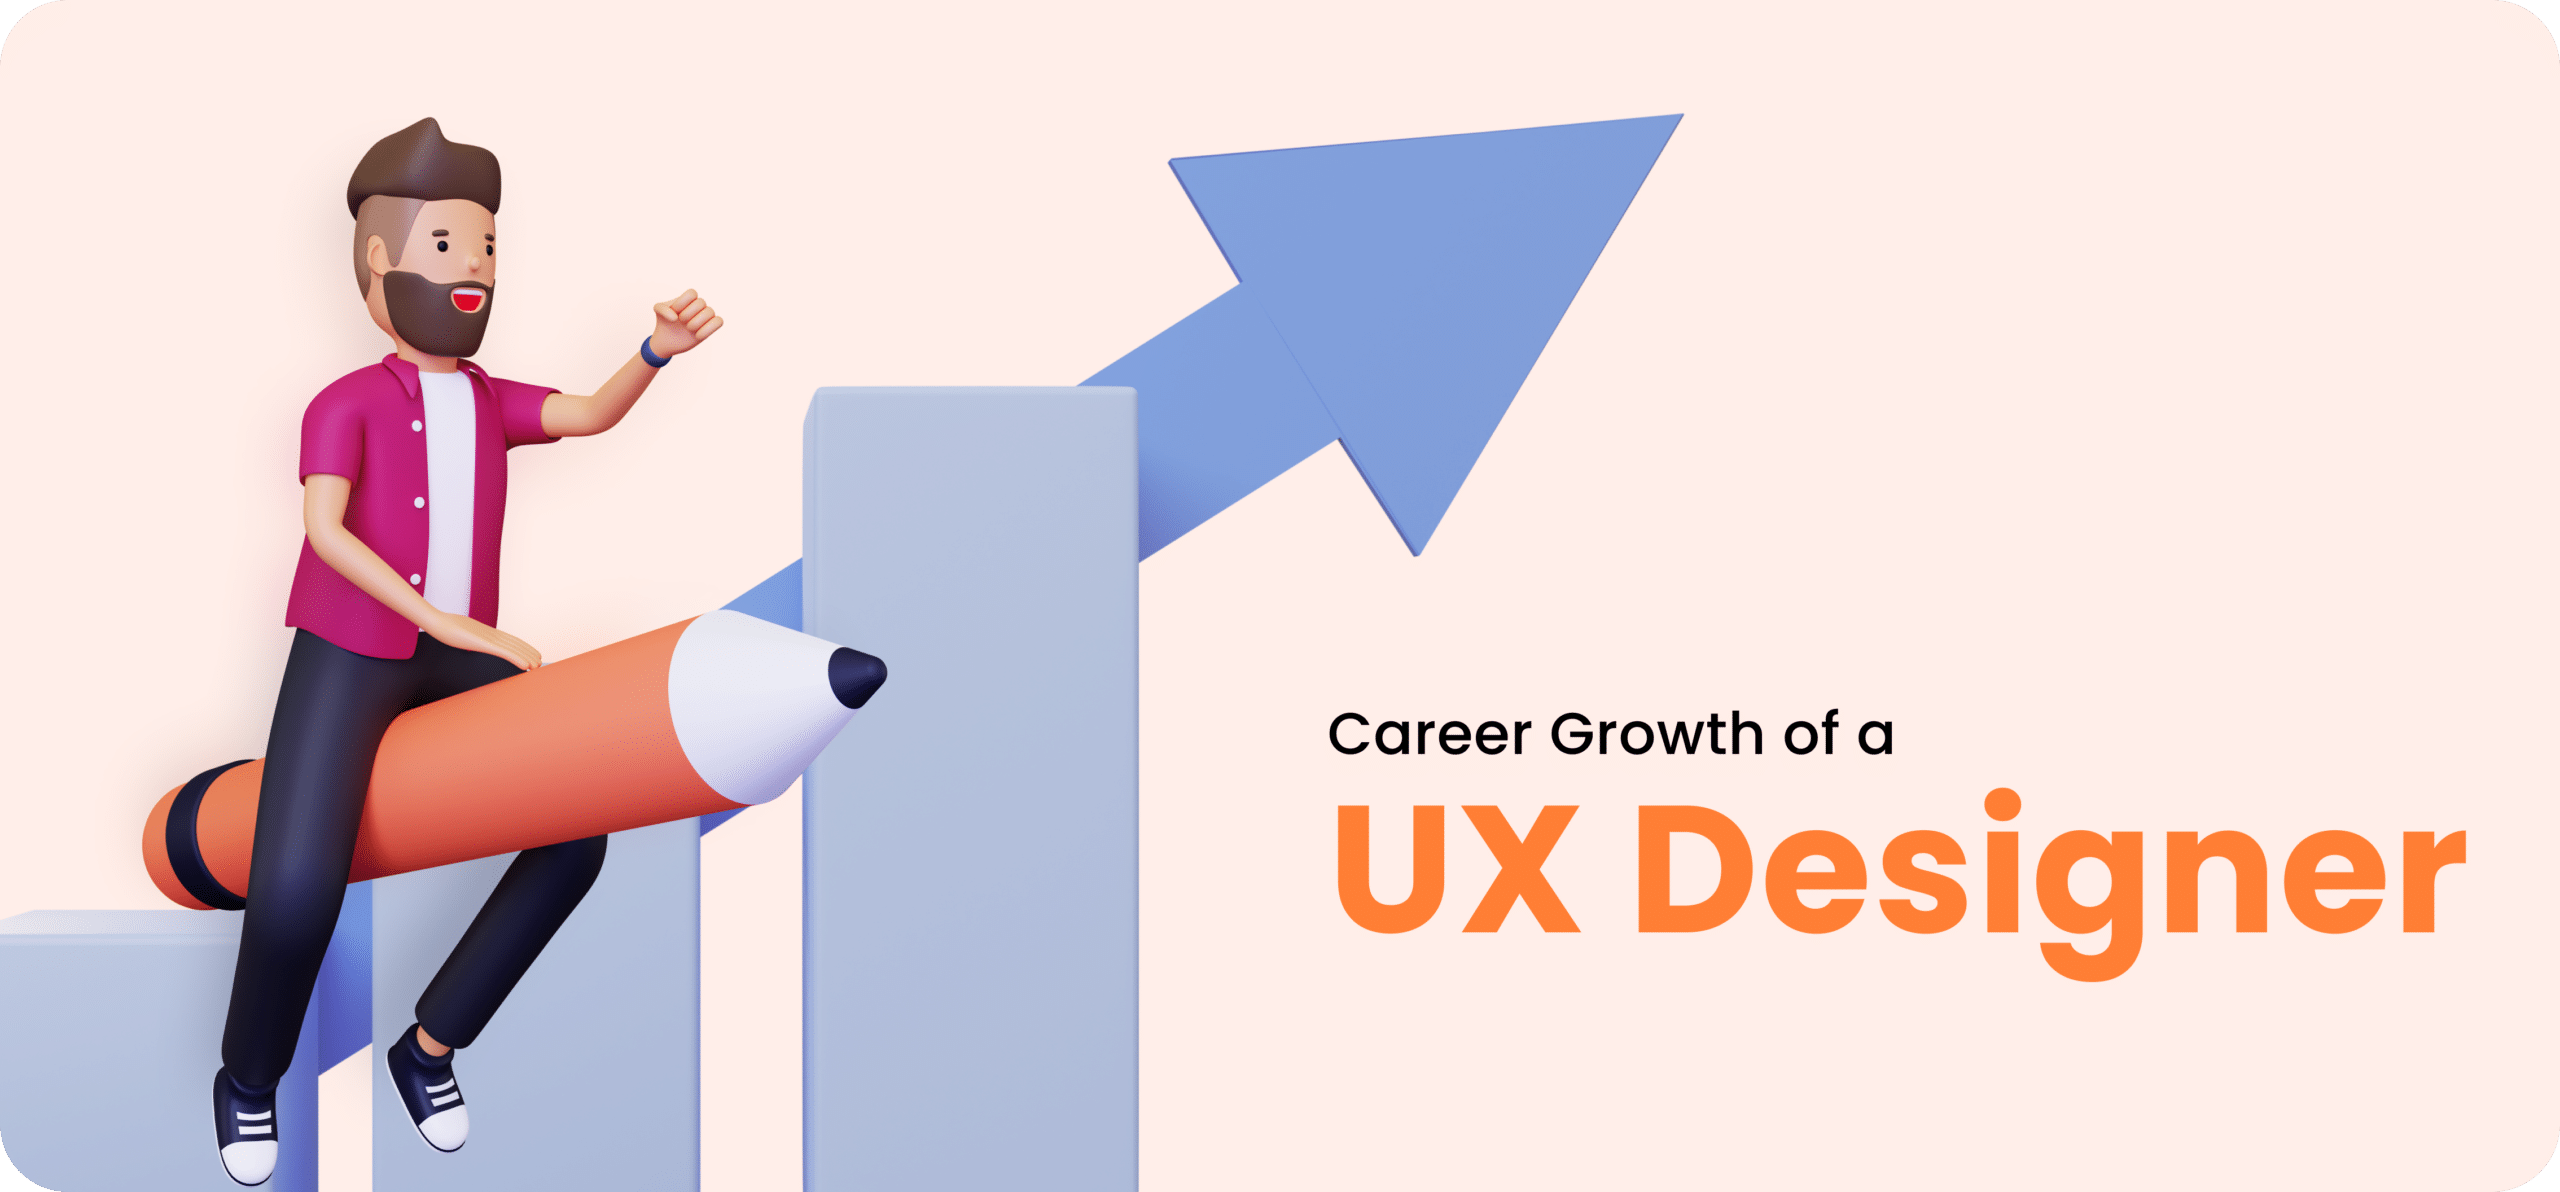 Career growth for UX designers in India